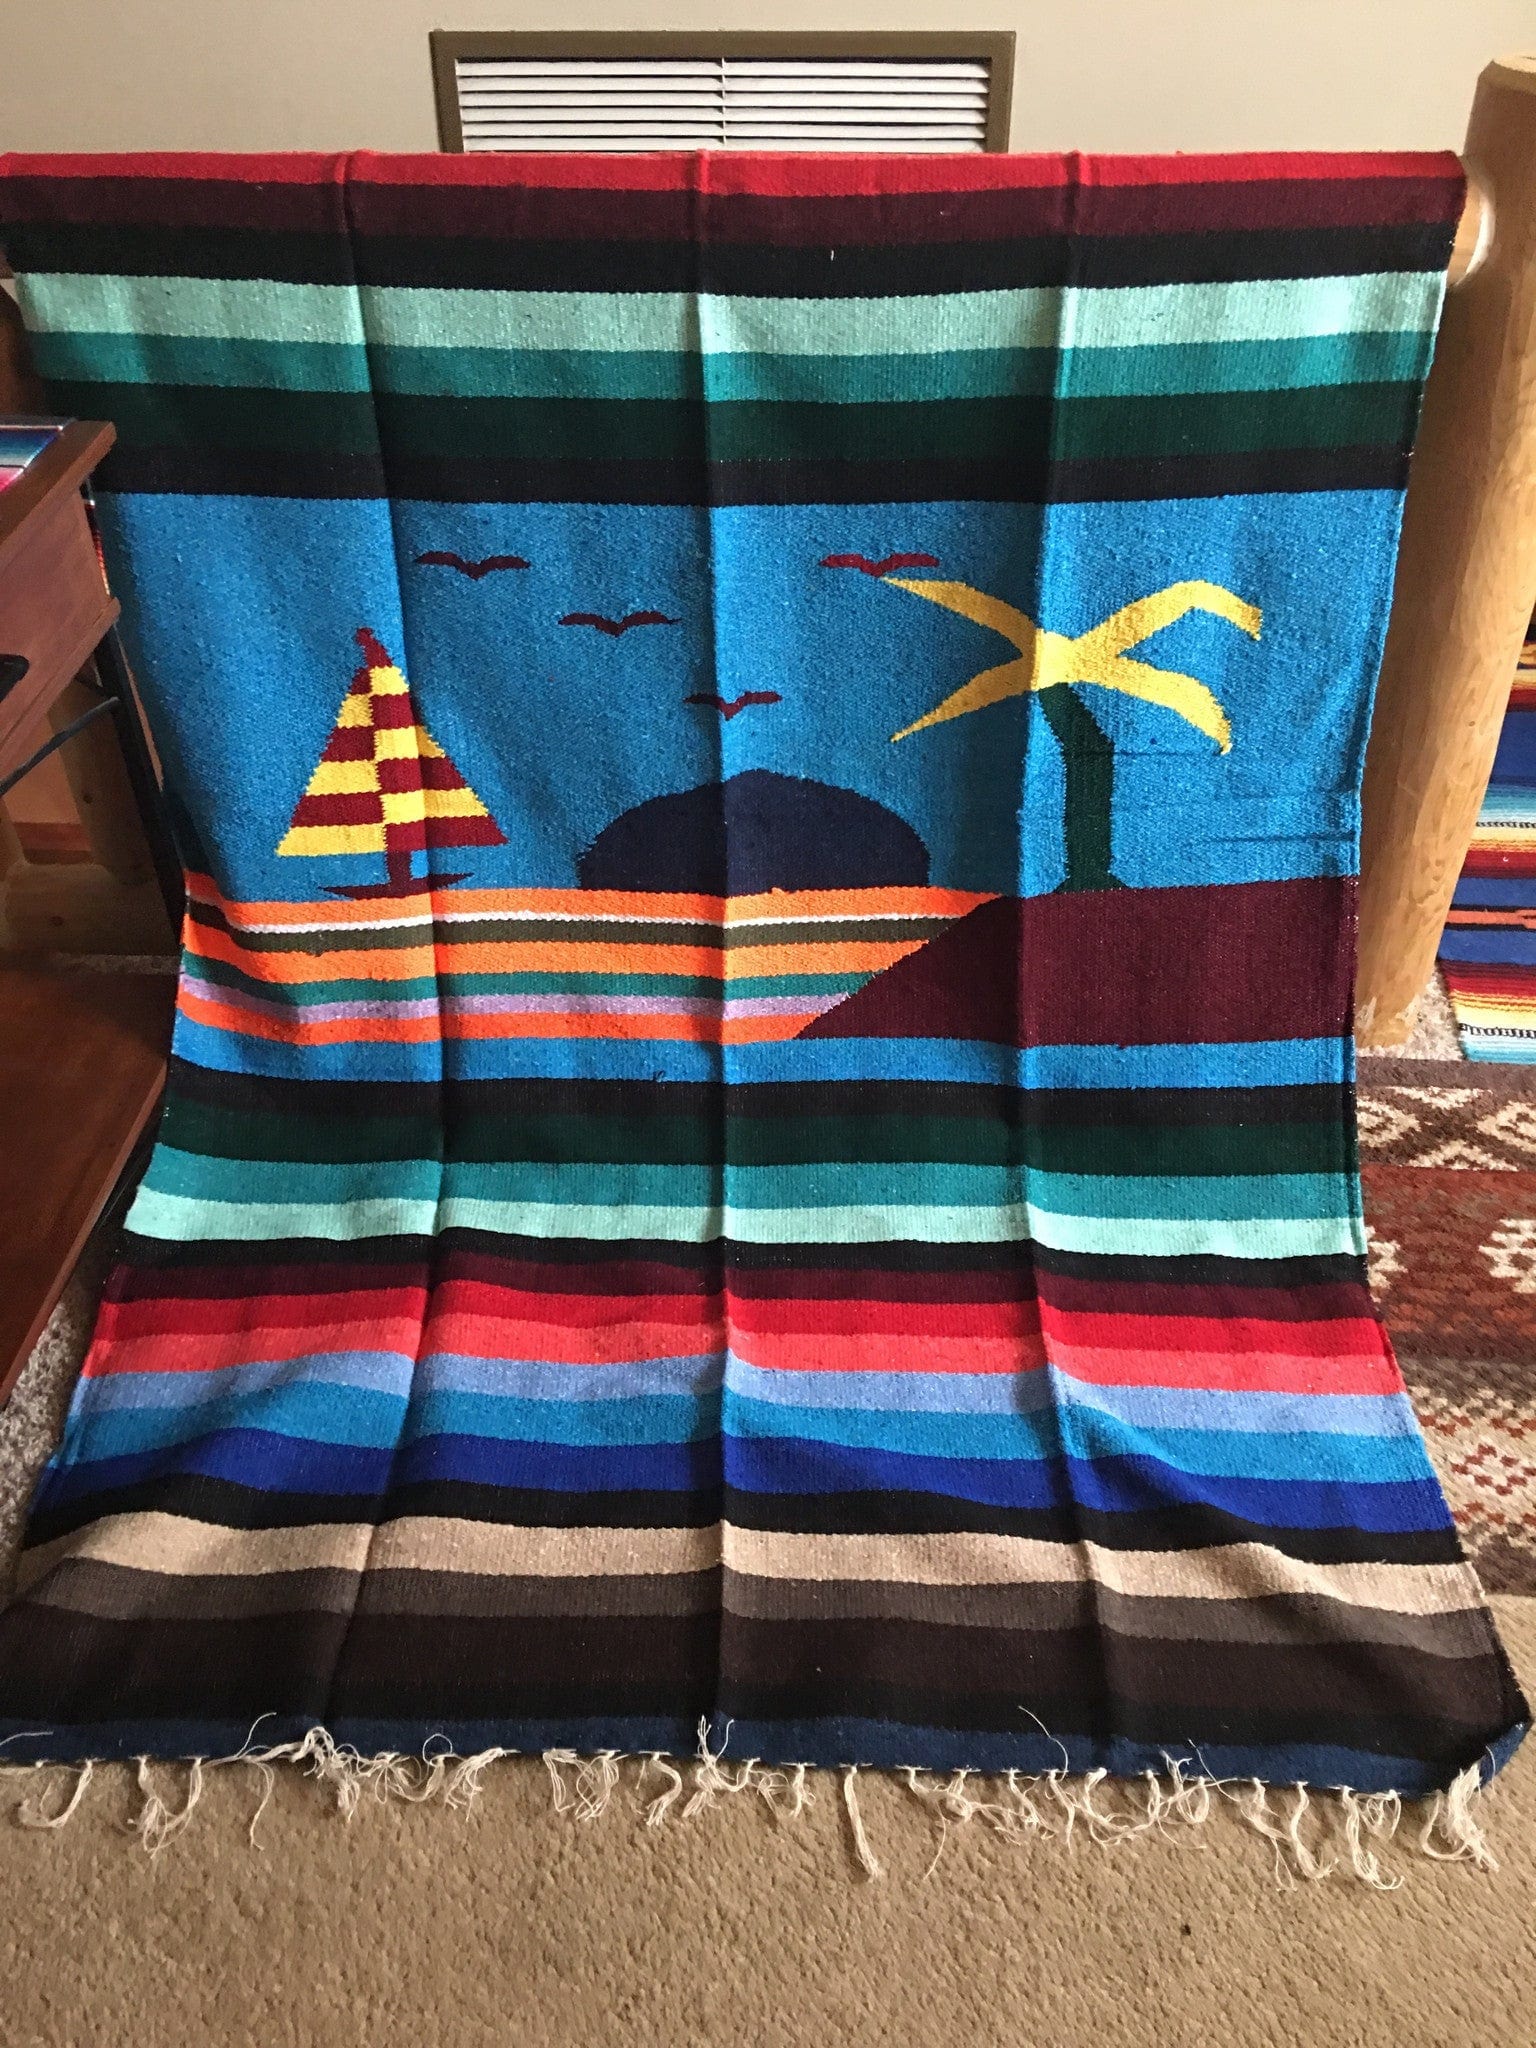 Paisano Blue mexican sunset blanket or rug 79"-50" southwestbedazzle blankets/slippers